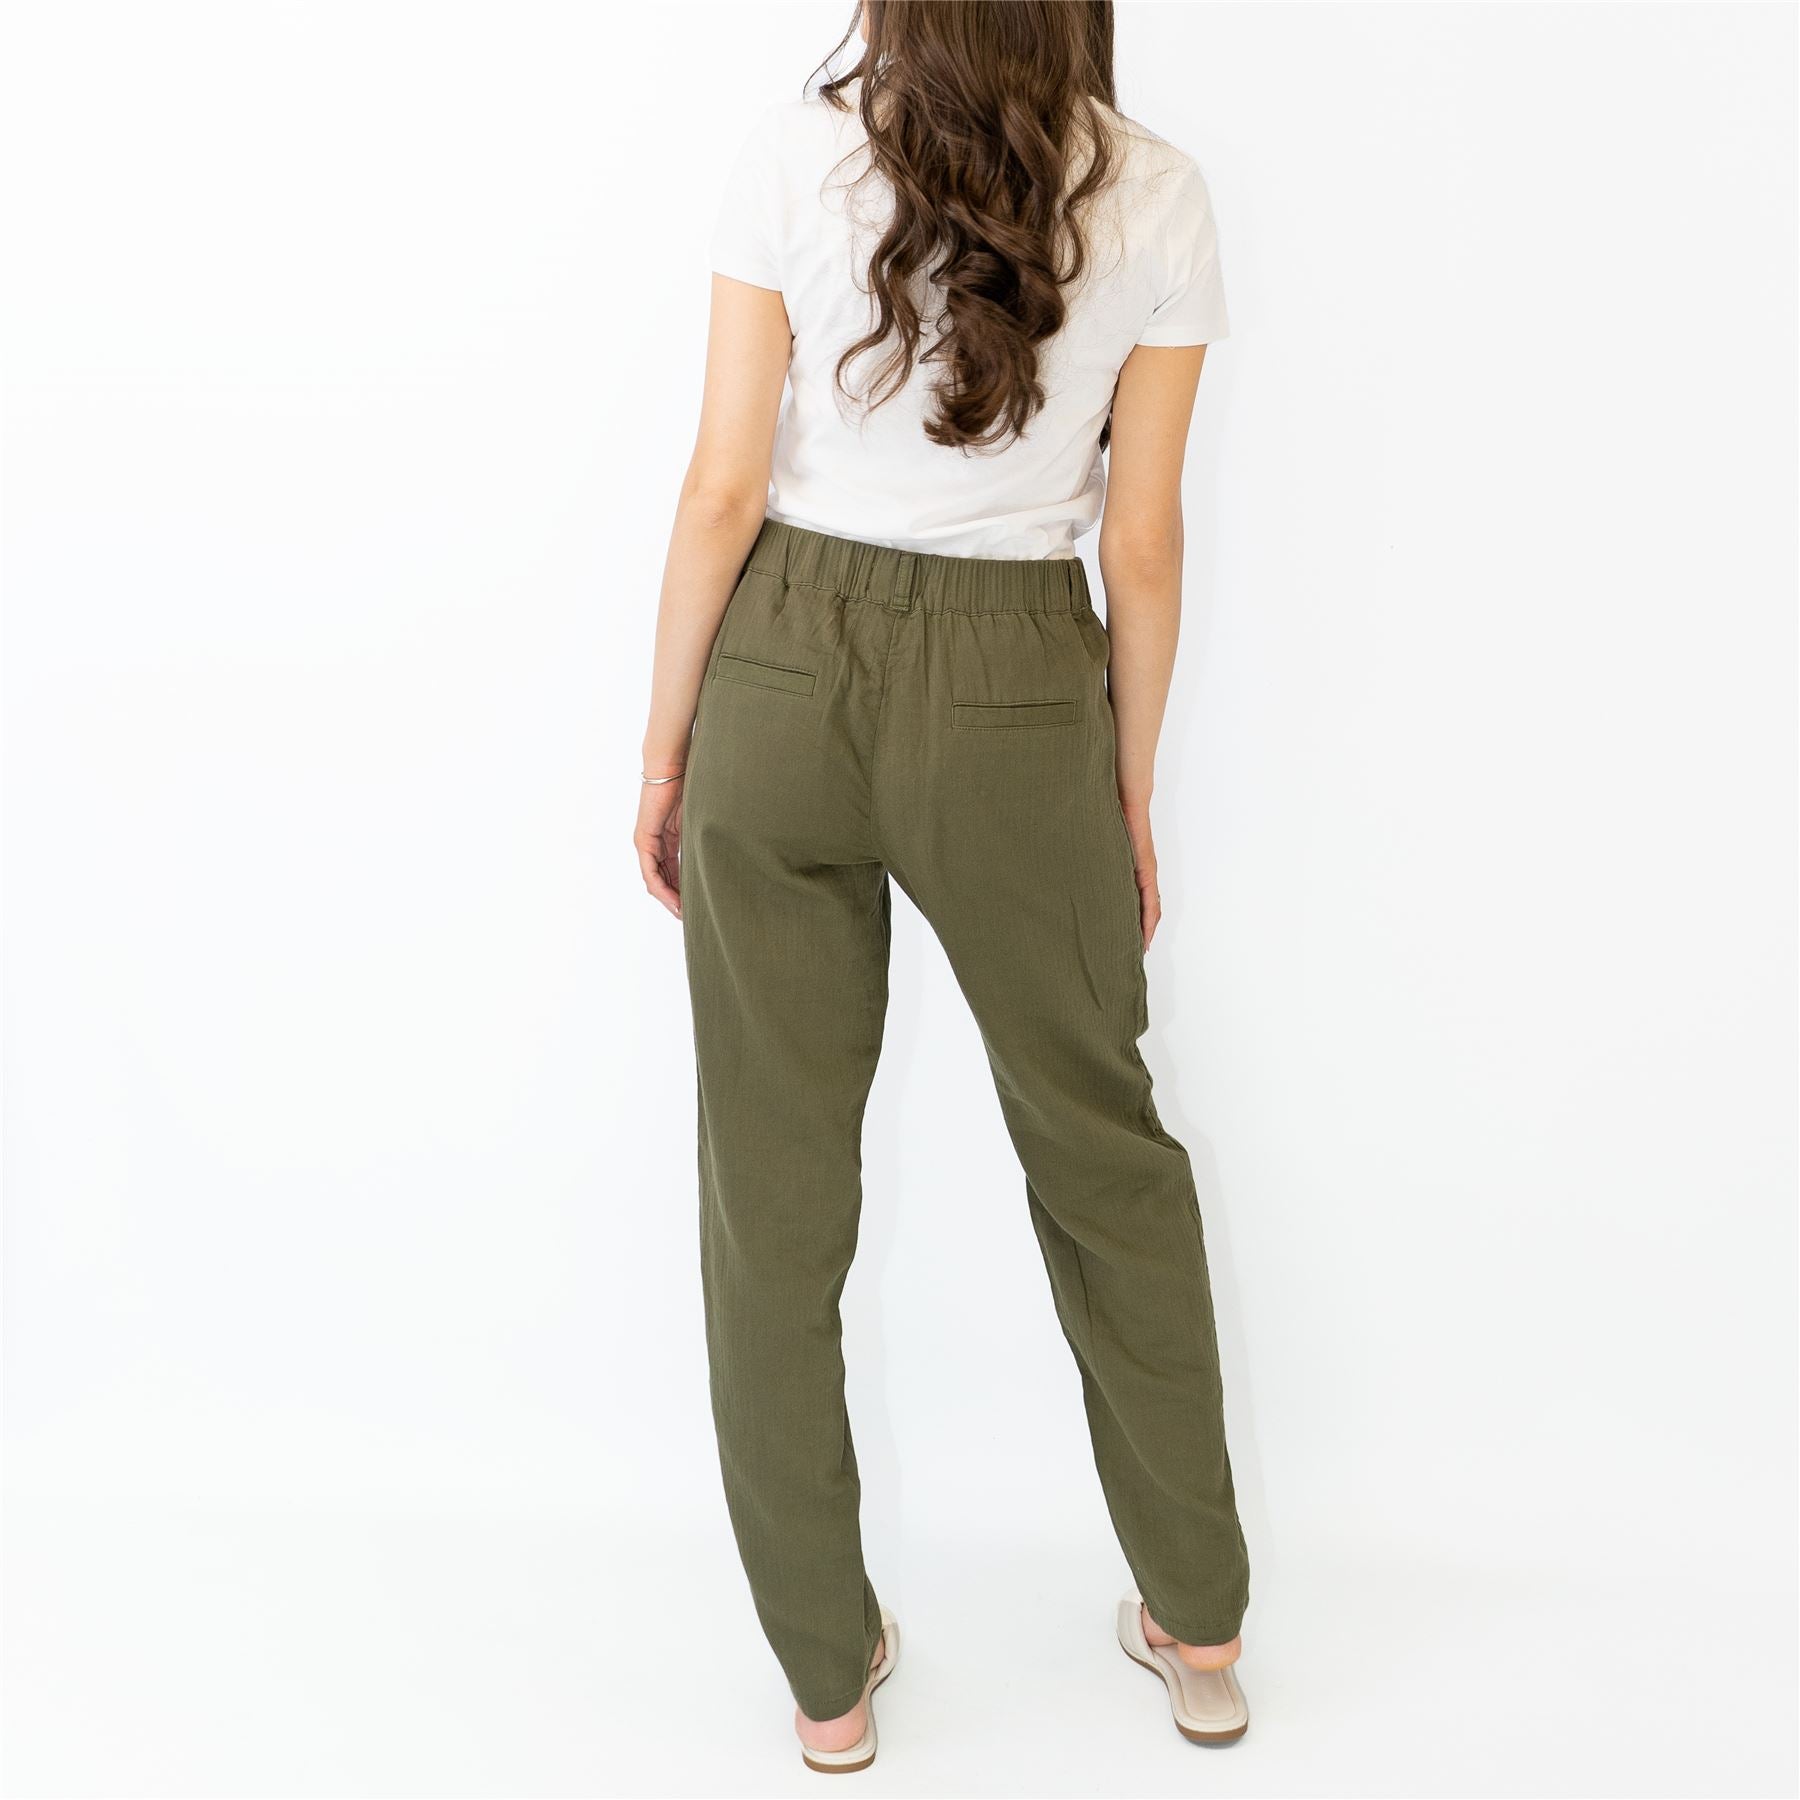 Buy Qeboo Collection Green Formal Pants Tapered High Waist Ankle